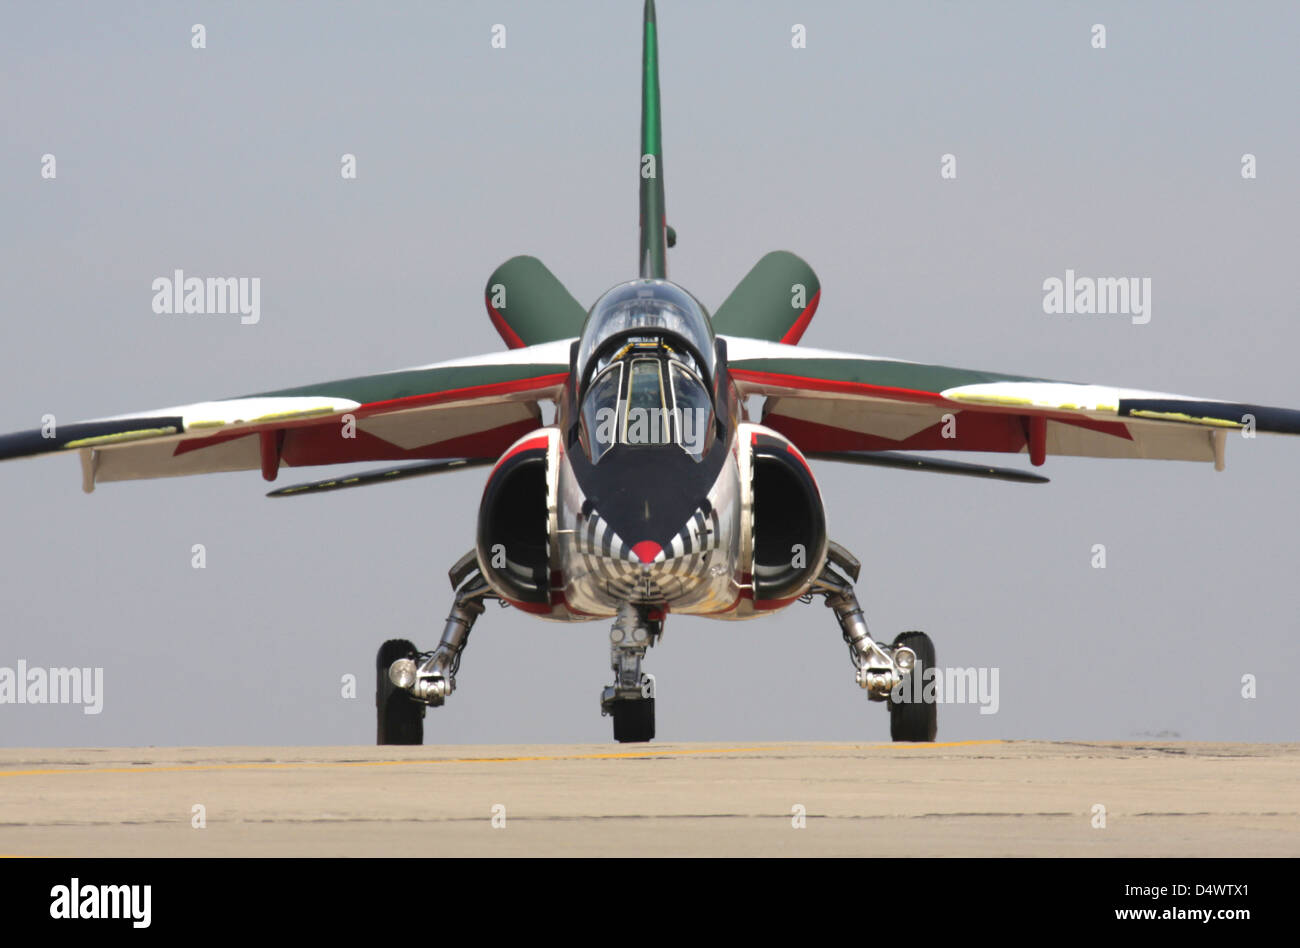 An Alpha Jet of the Portuguese Air Force demo team Asas de Portugal taxiing at Beja, Portugal. Stock Photo